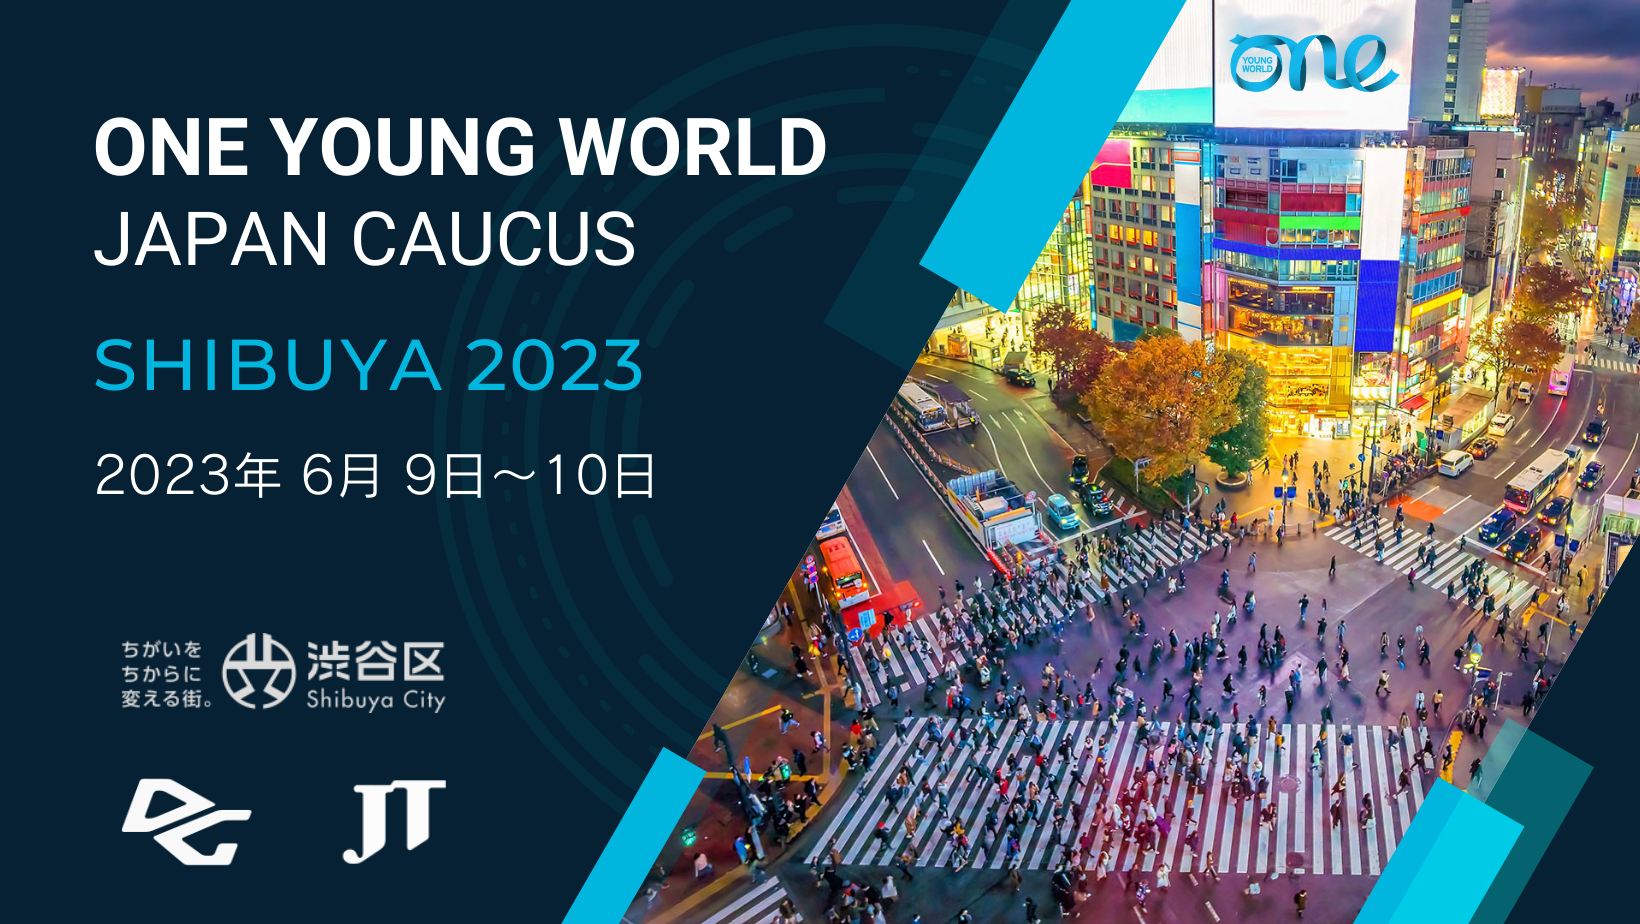 ONE YOUNG WORLD JAPAN CAUCUS 2023 イベント・レポート